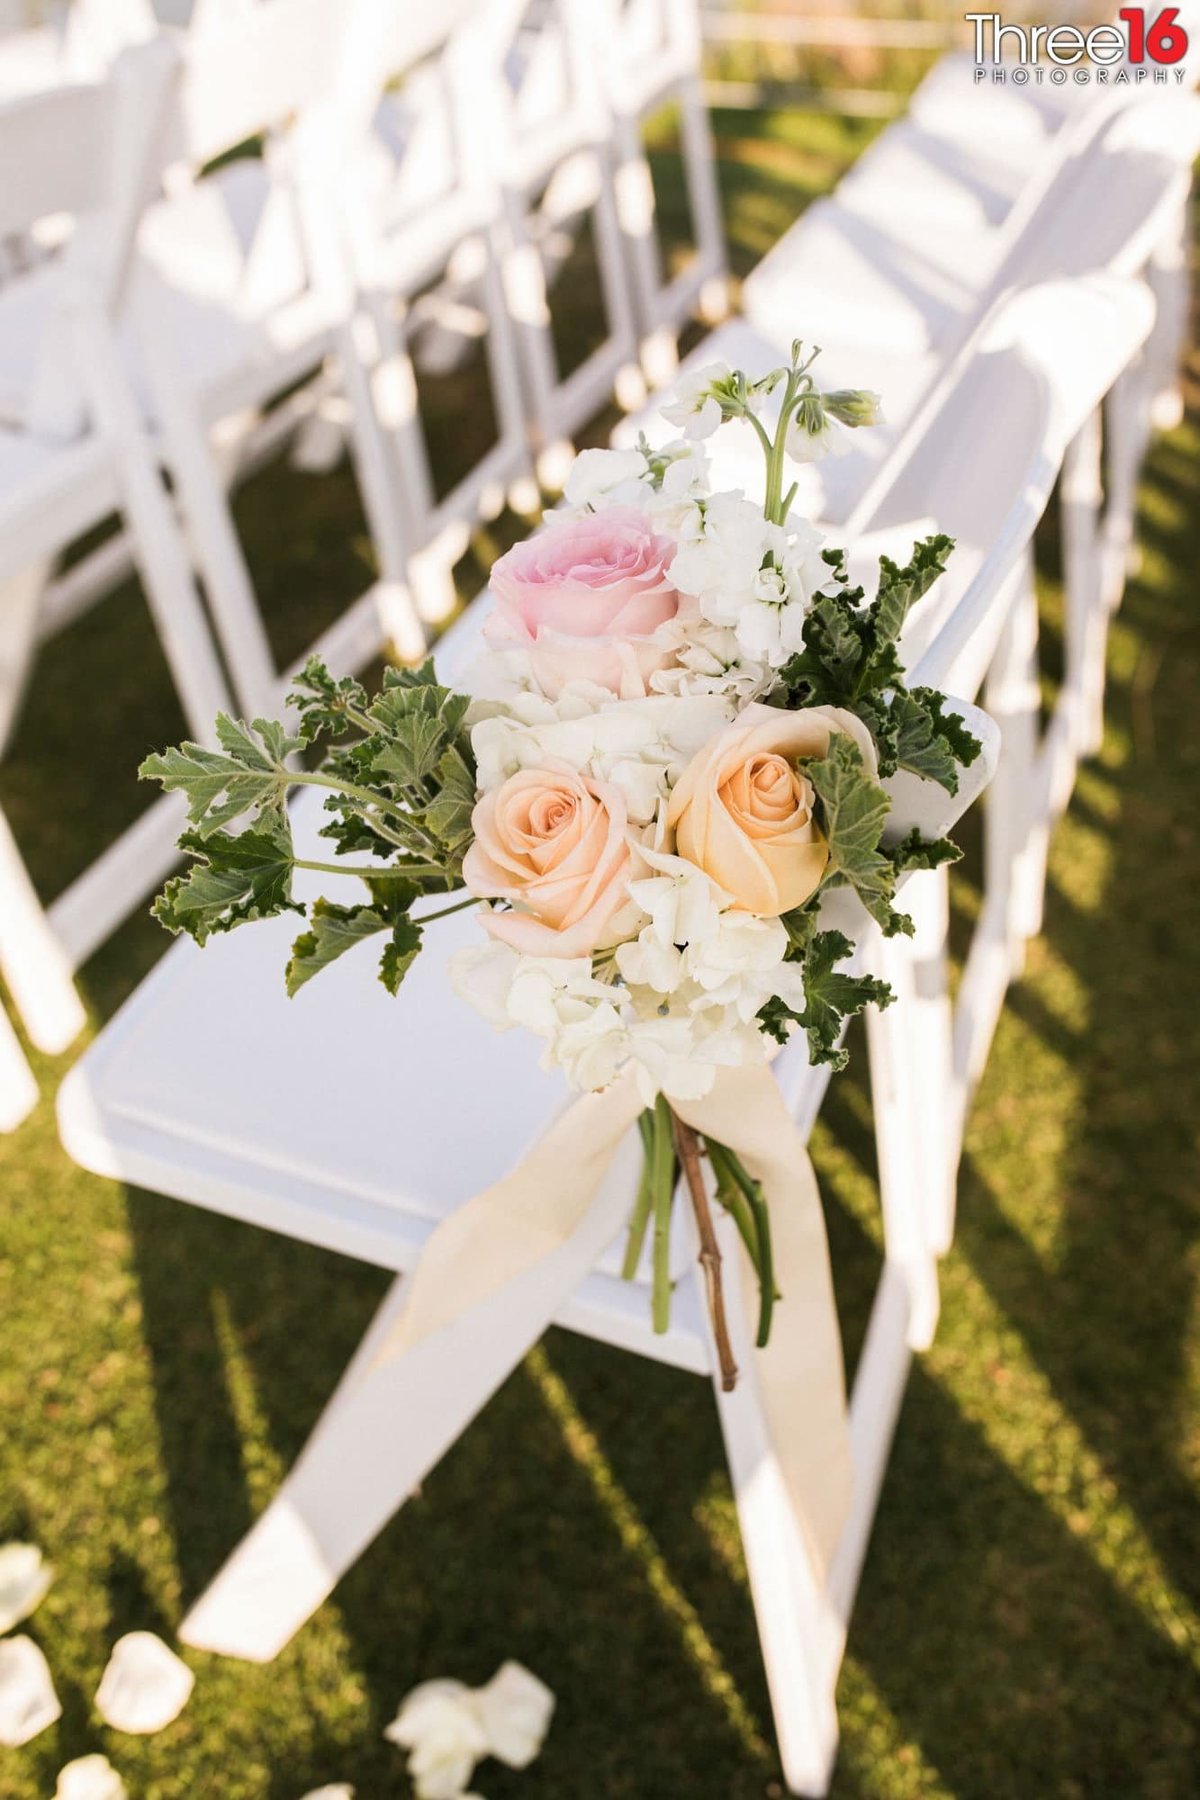 Floral decor on the seats for wedding ceremony